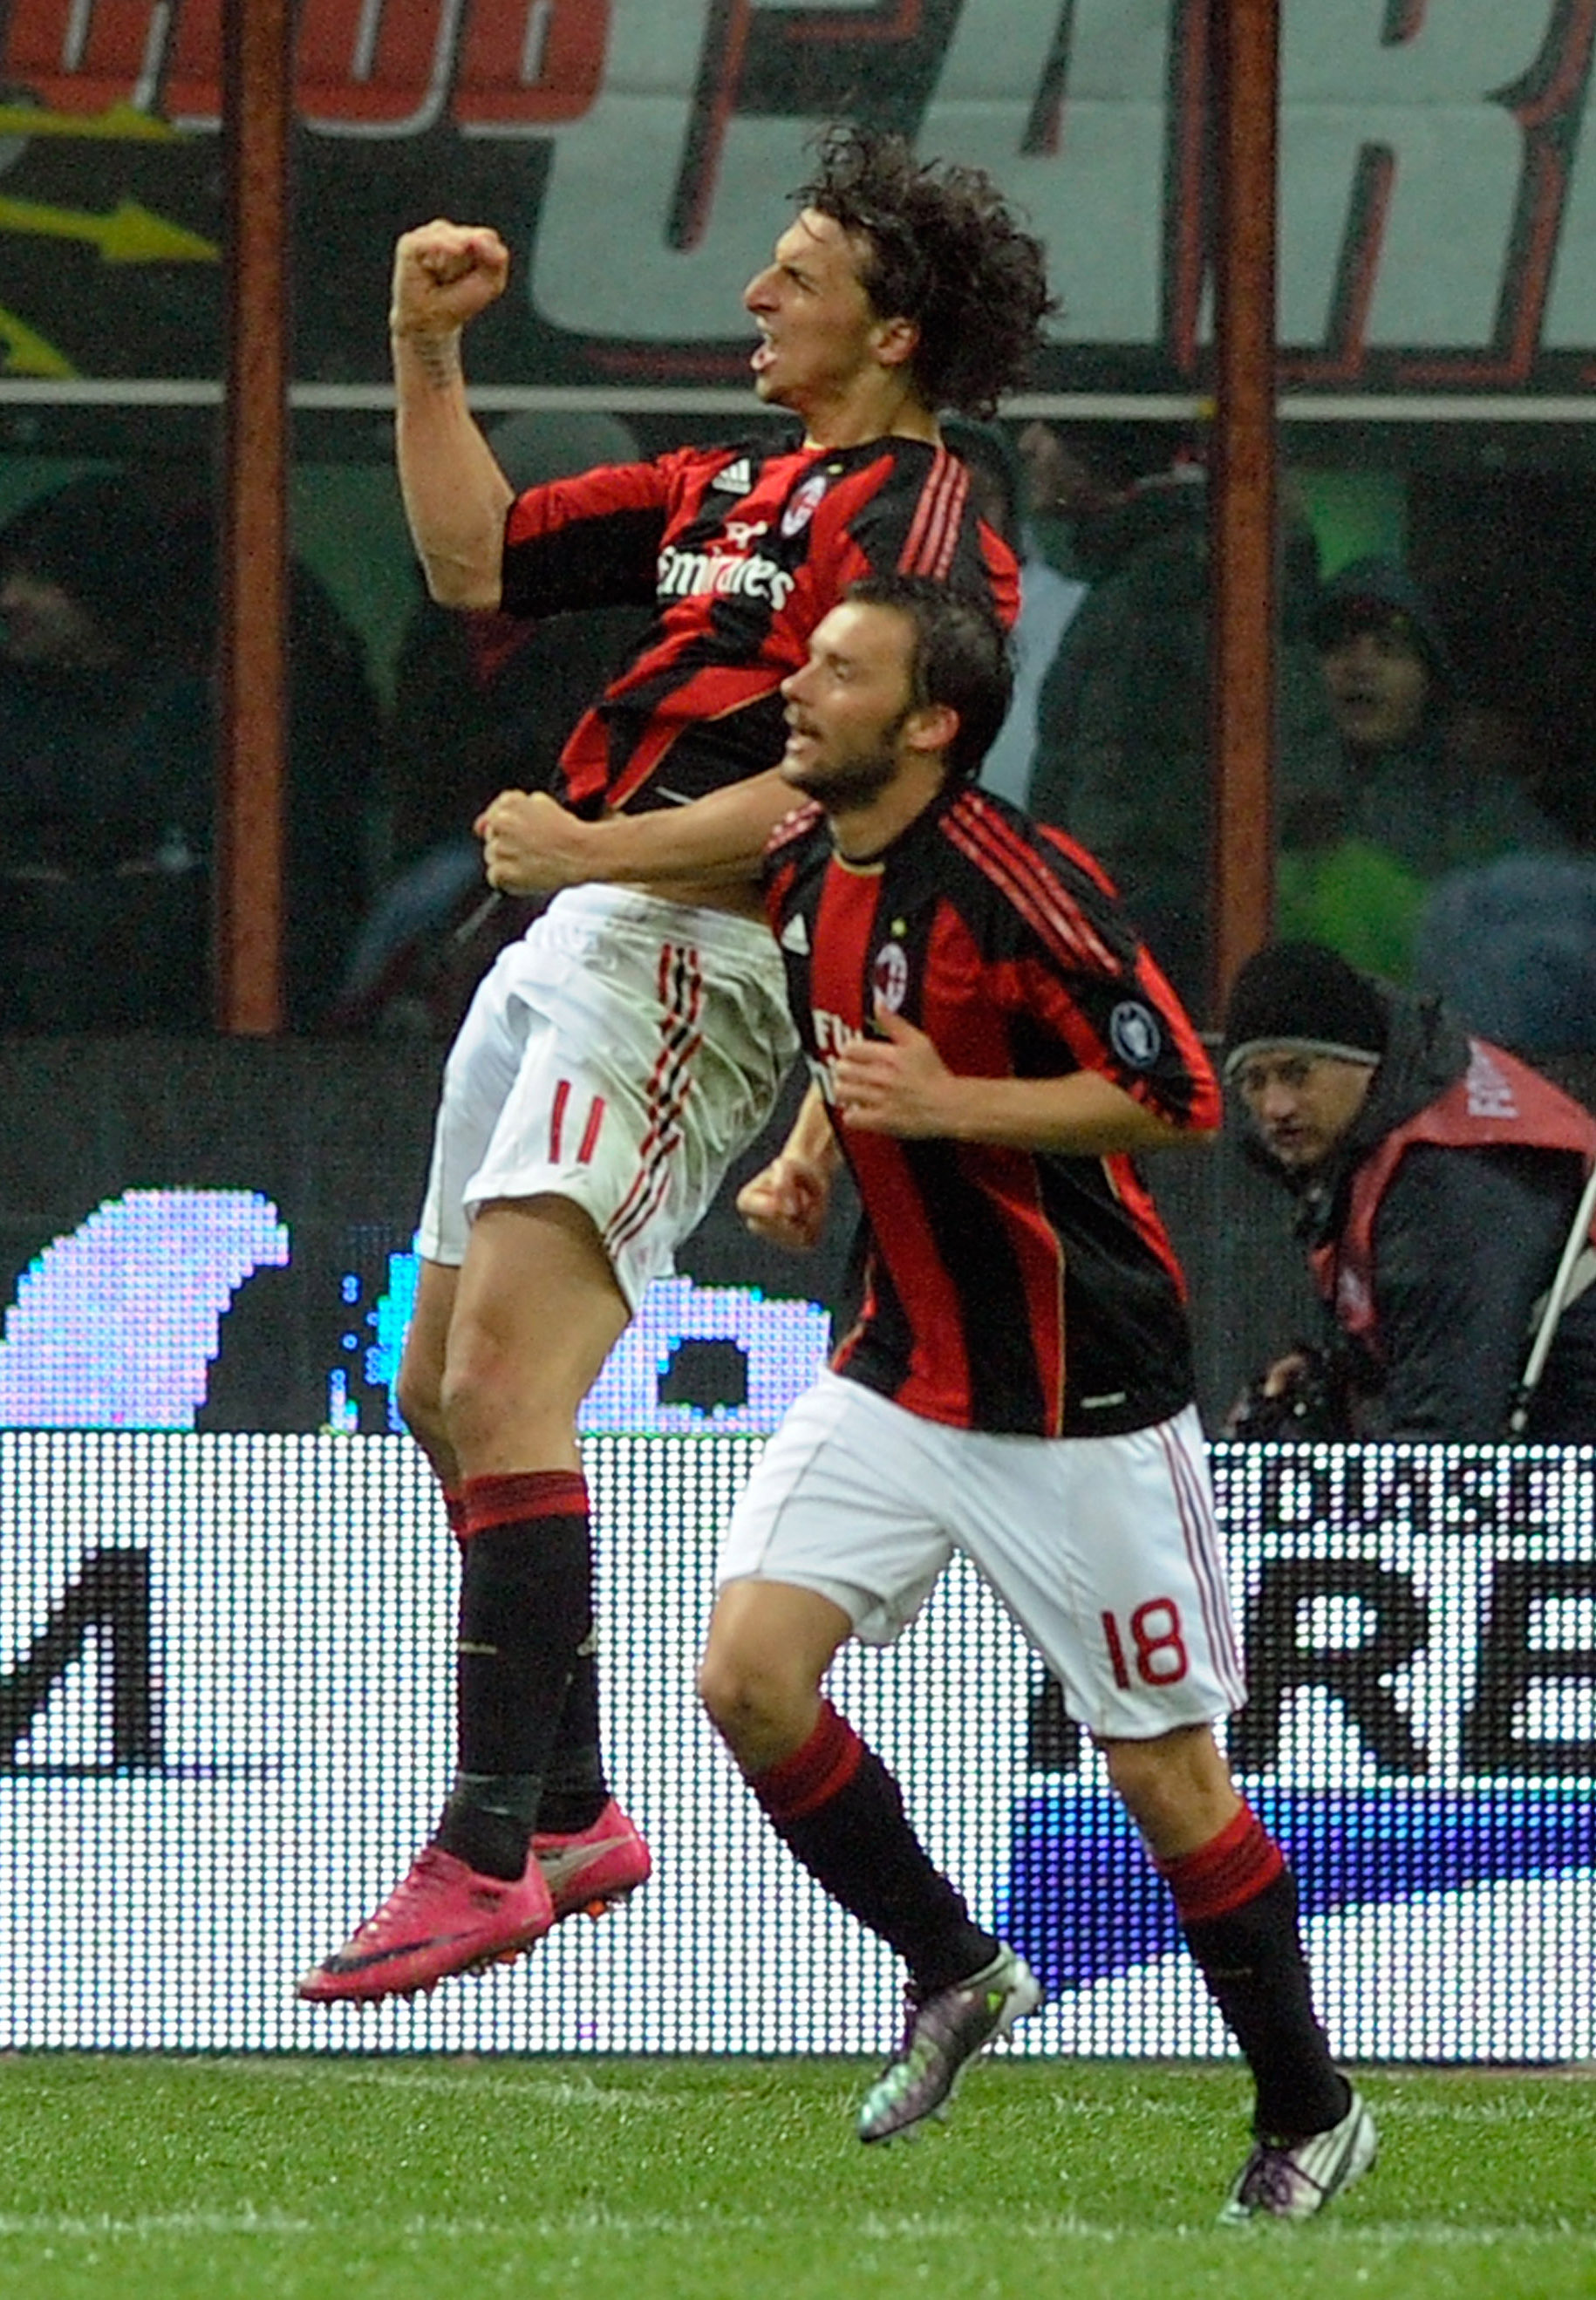 MILAN, ITALY - FEBRUARY 28:  Zlatan Ibrahimovic of AC Milan celebrates scoring the first goal during the Serie A match between AC Milan and SSC Napoli at Stadio Giuseppe Meazza on February 28, 2011 in Milan, Italy.  (Photo by Claudio Villa/Getty Images)